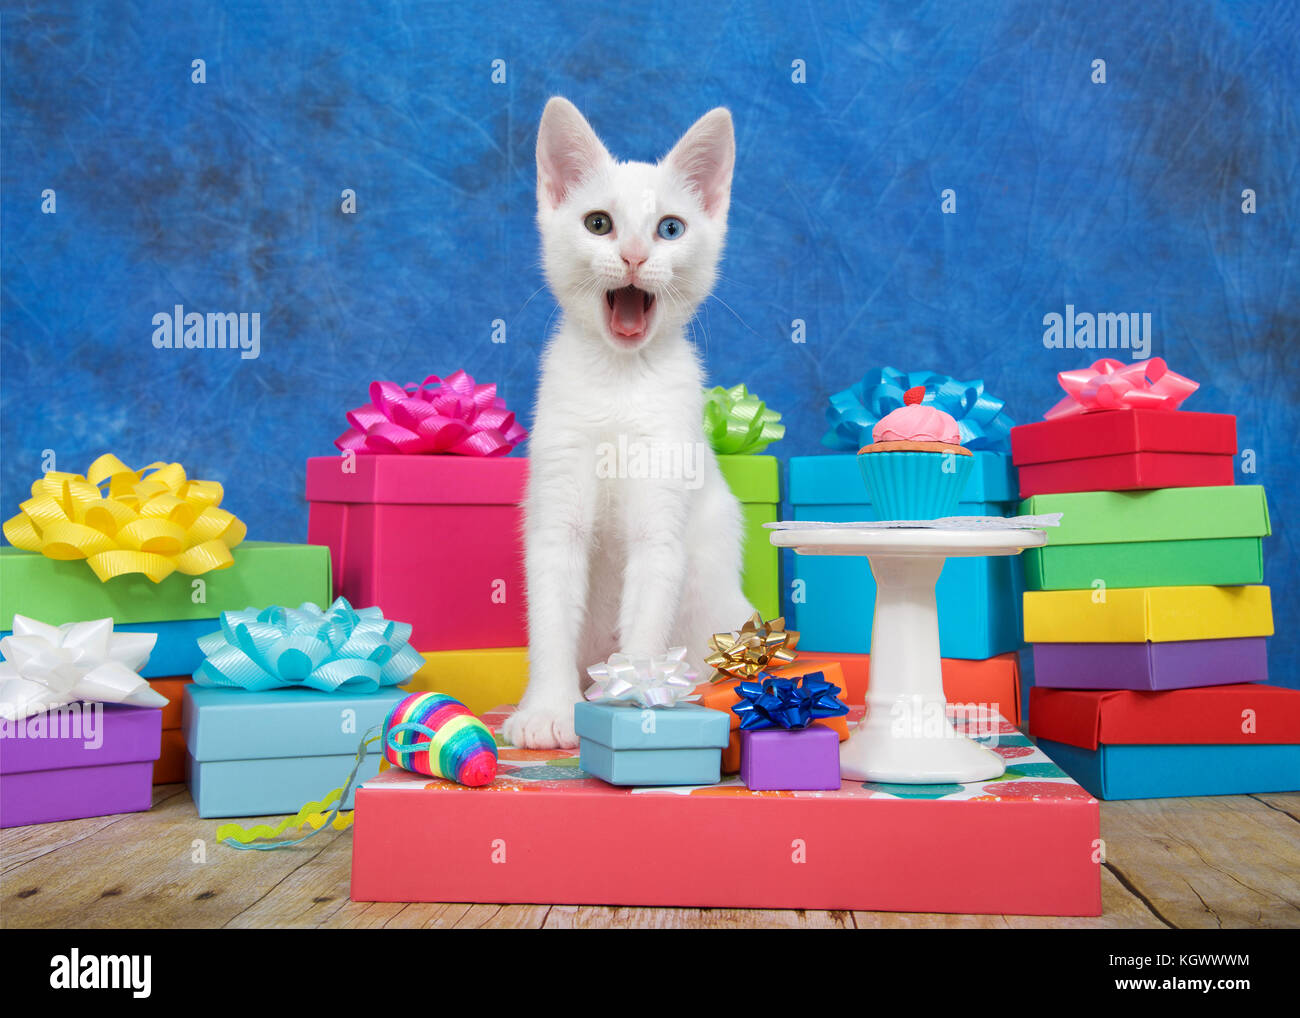 Small white kitten with heterochromia eyes, sitting next to a miniature birthday cupcake on pedestal surrounded by colorful birthday presents looking  Stock Photo